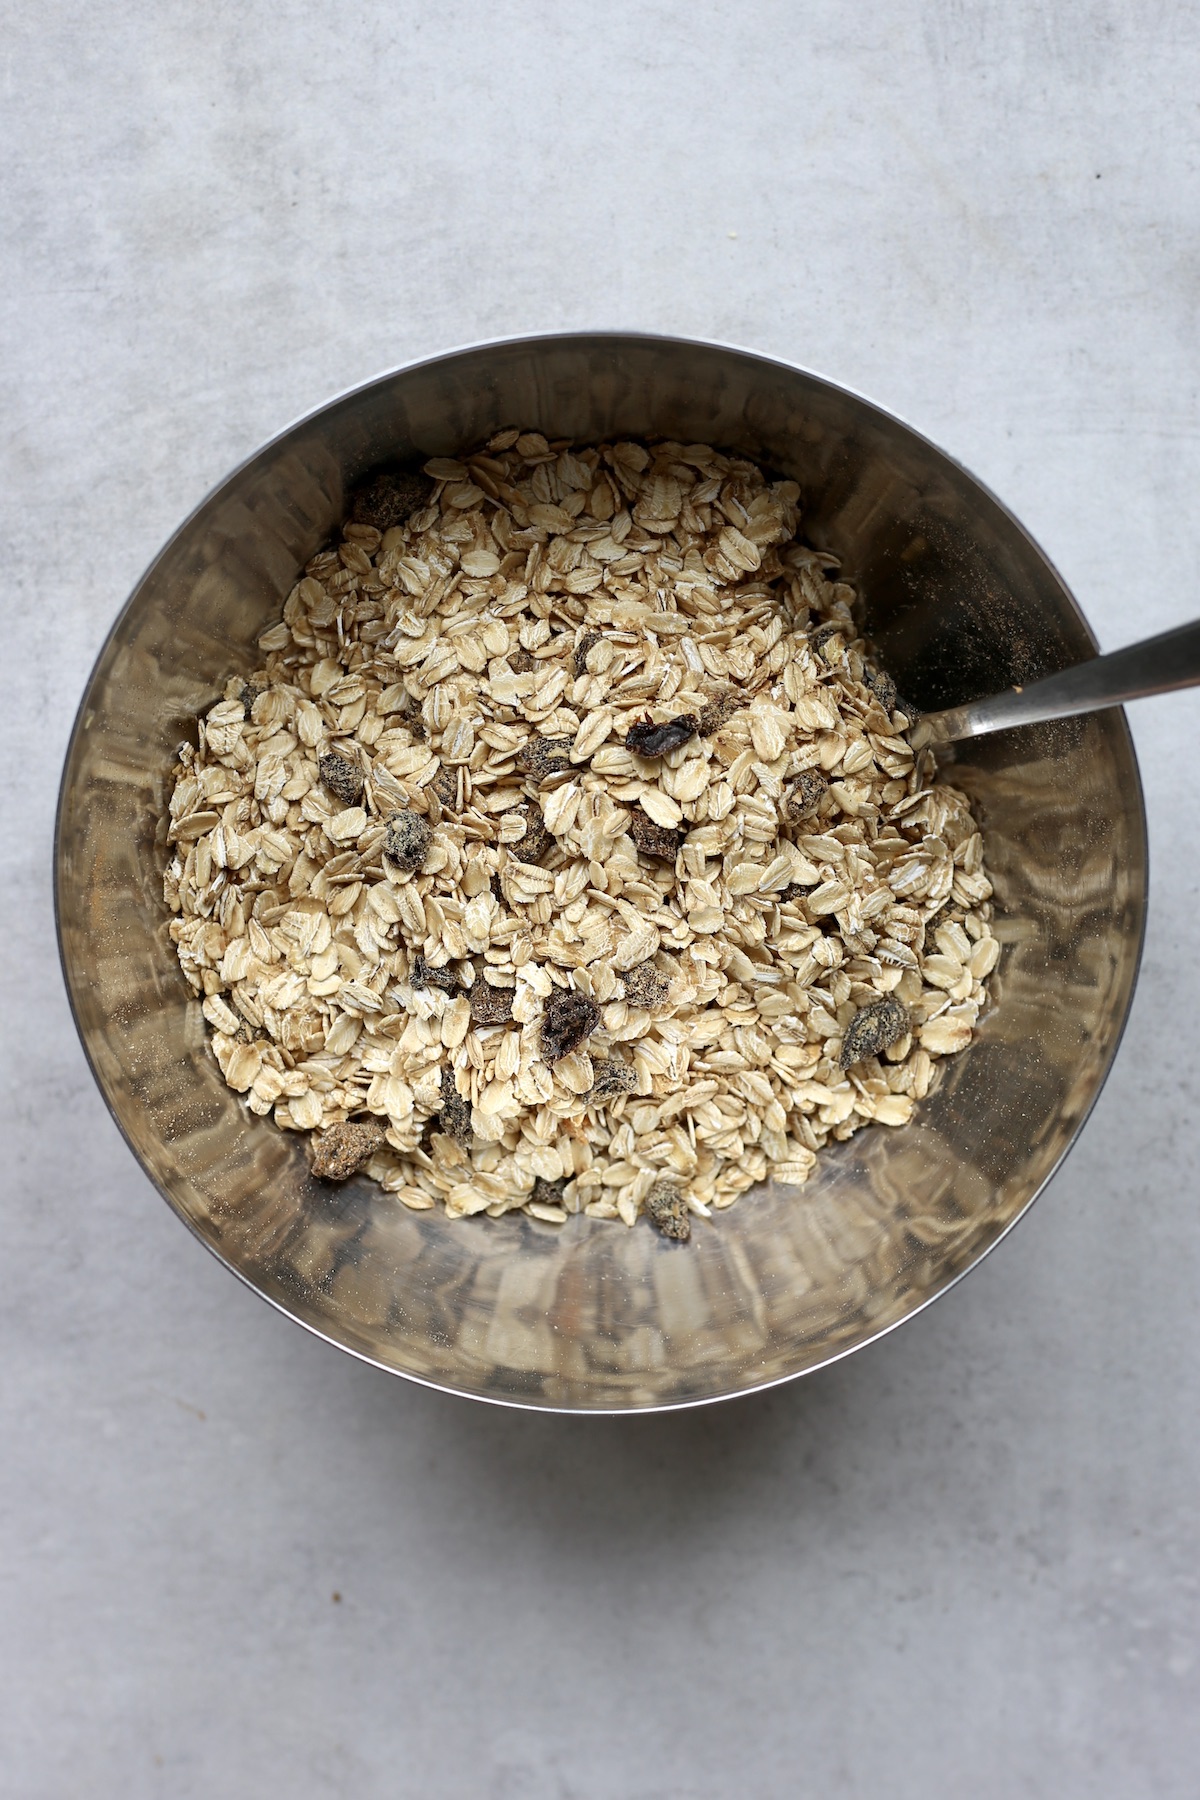 Rolled oats, raisins, ground flaxseed and spices being stirred together in a metal mixing bowl.